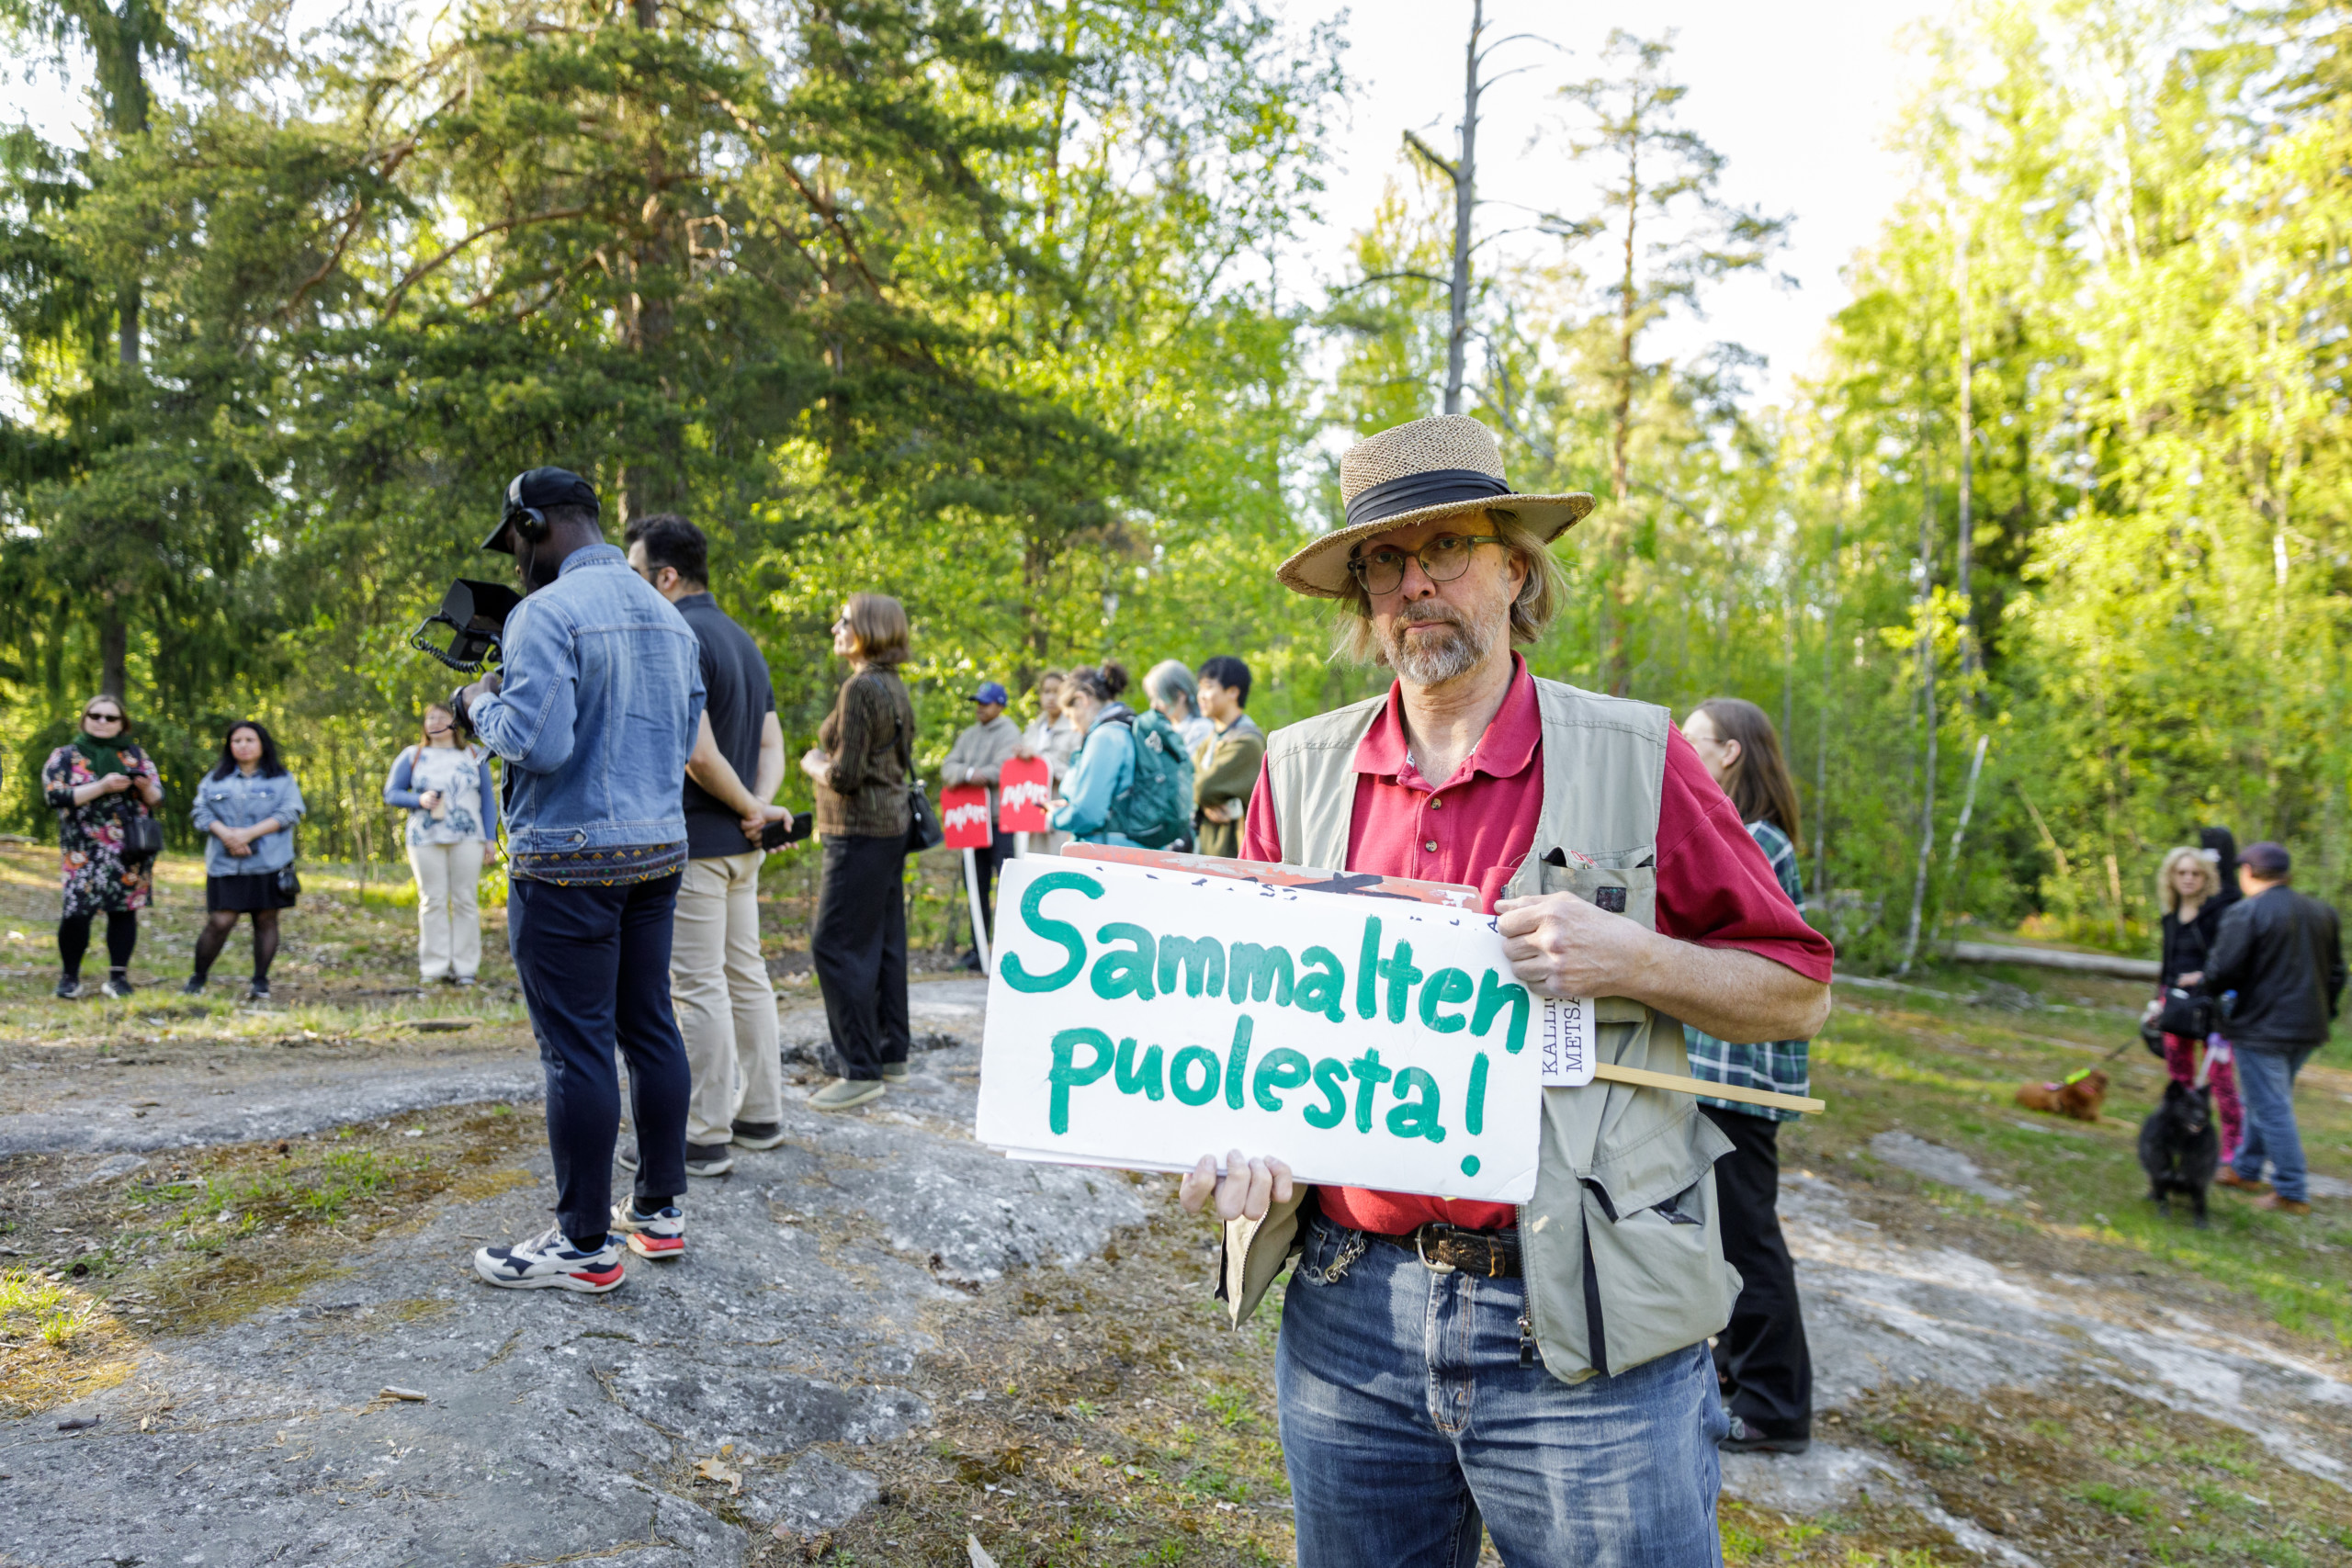 Man with a hat holding a sign saying "For the mosses" in Finnish.